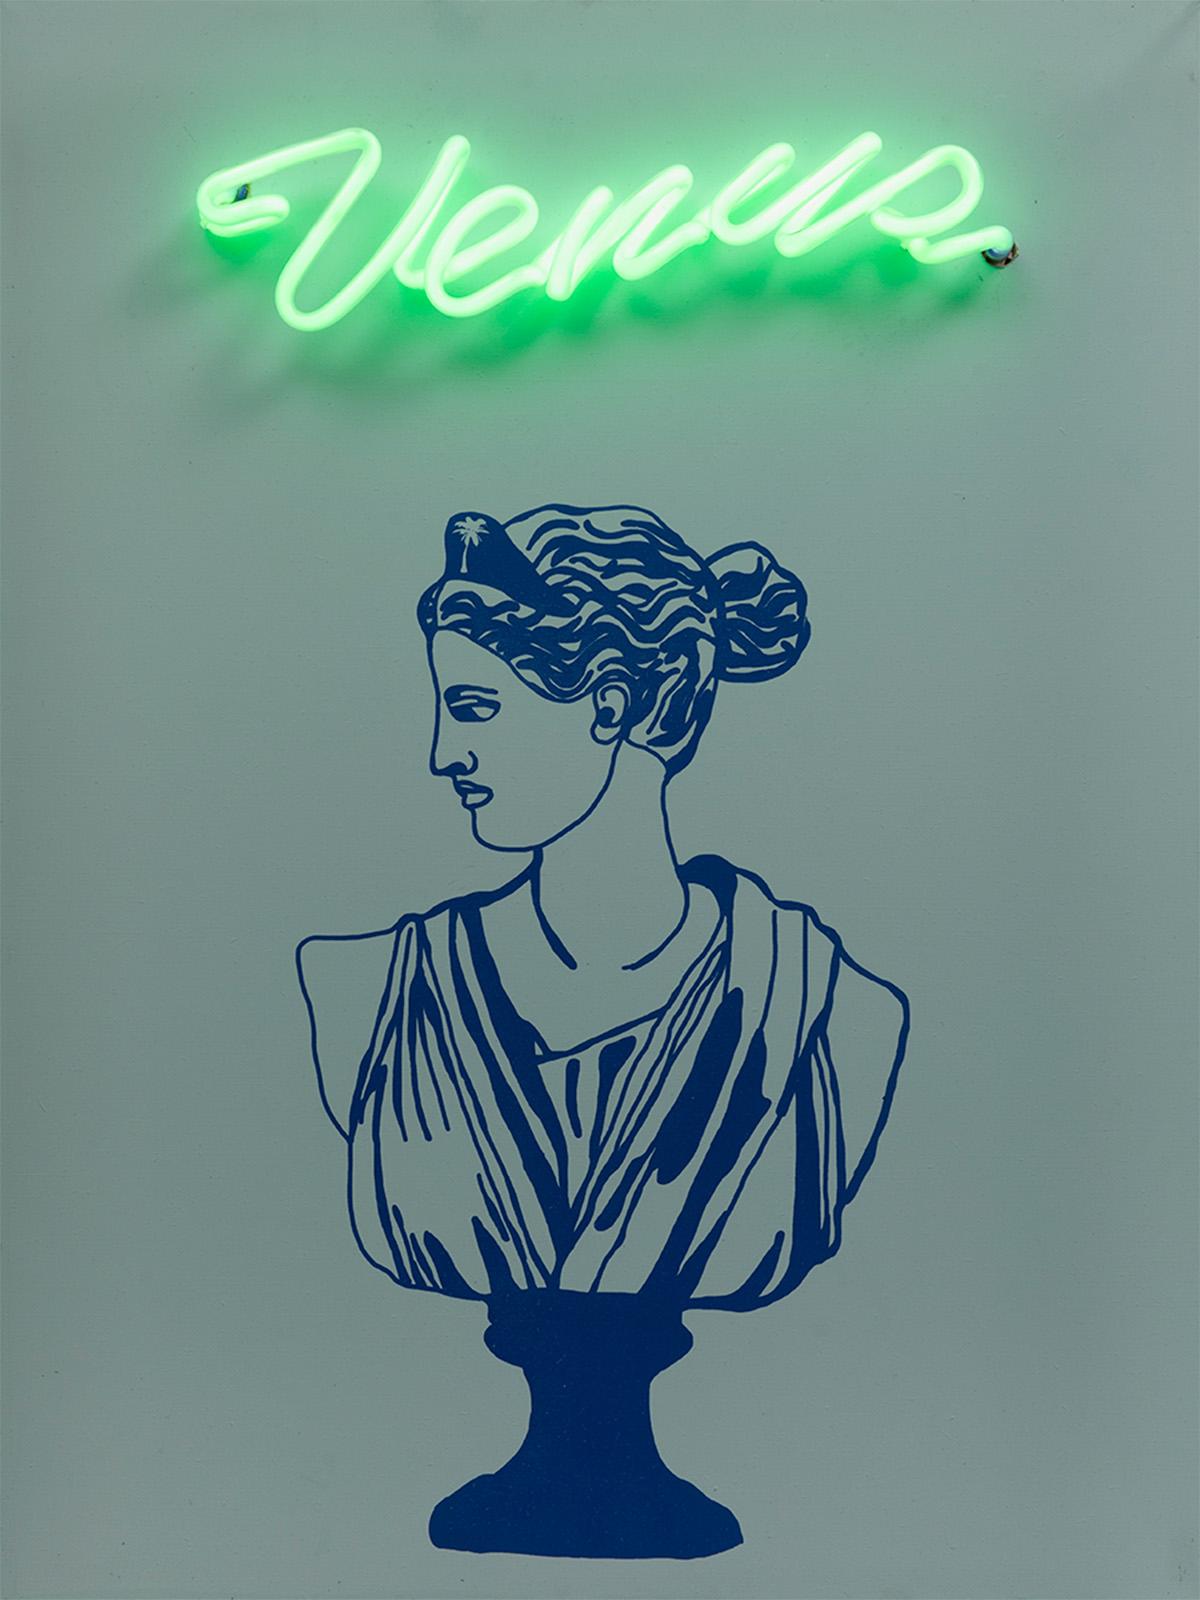 Venus, 2019  Paloma Castello 
From the series Neon Classics
Screen printing with neon lights
Dimensions: 24 H in x 18.1 W x 5.9 D in. 
Edition 6/10

In her work She likes to bring life to objects or icons from the past, intervening in them a bit,